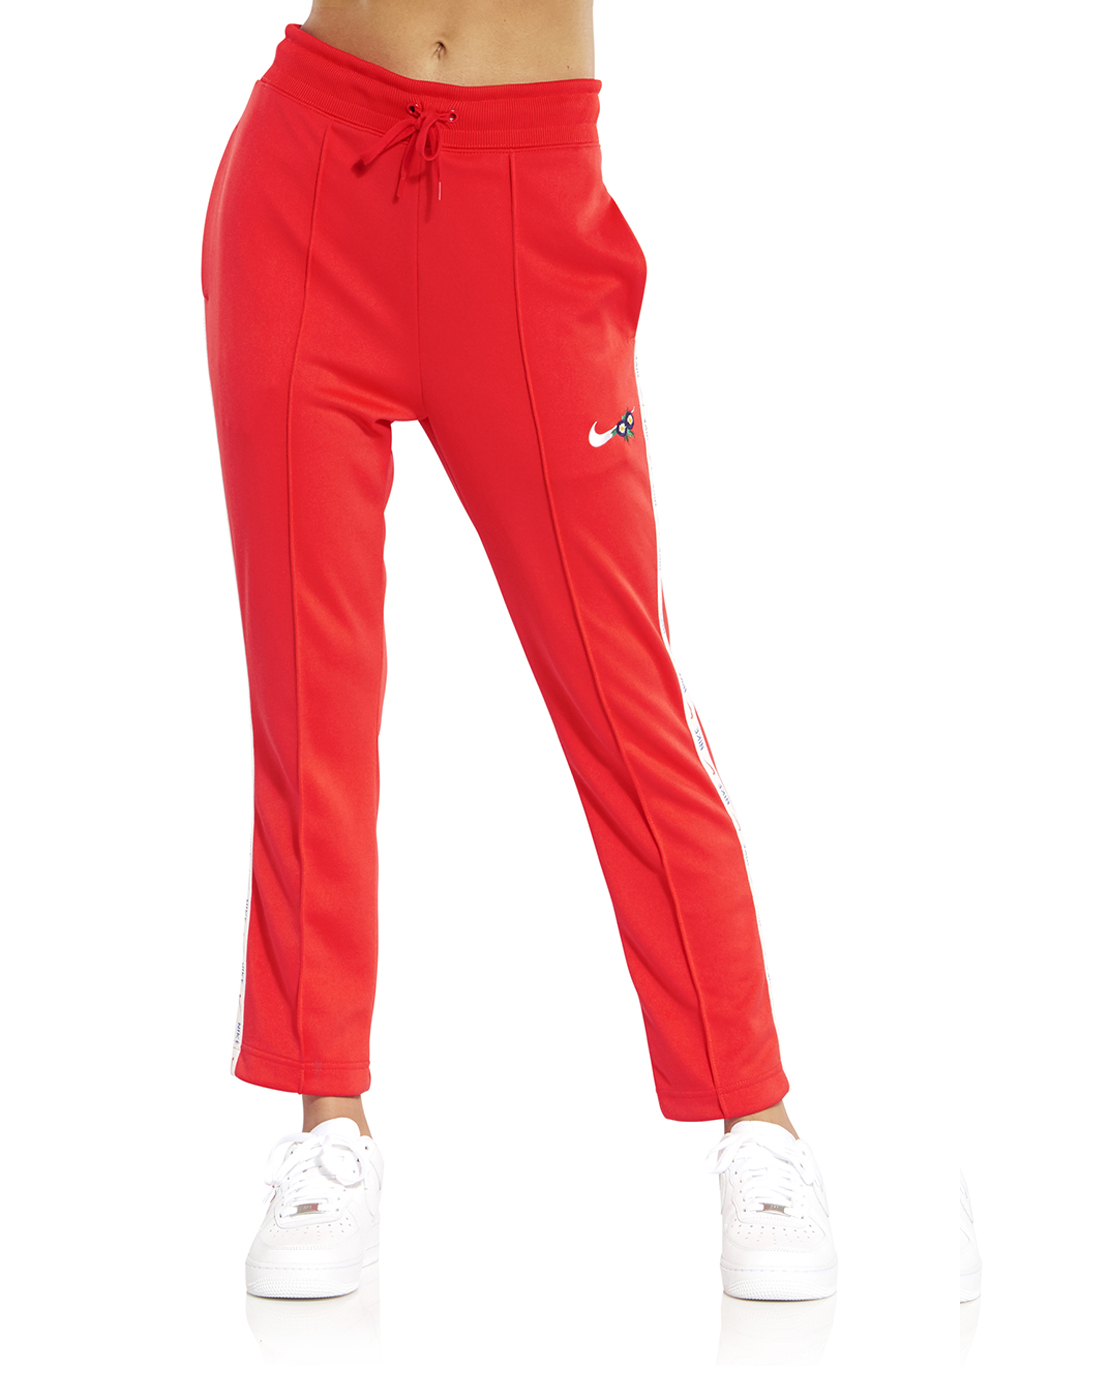 Women's Red Nike Hyper Femme Floral Pants | Life Style Sports